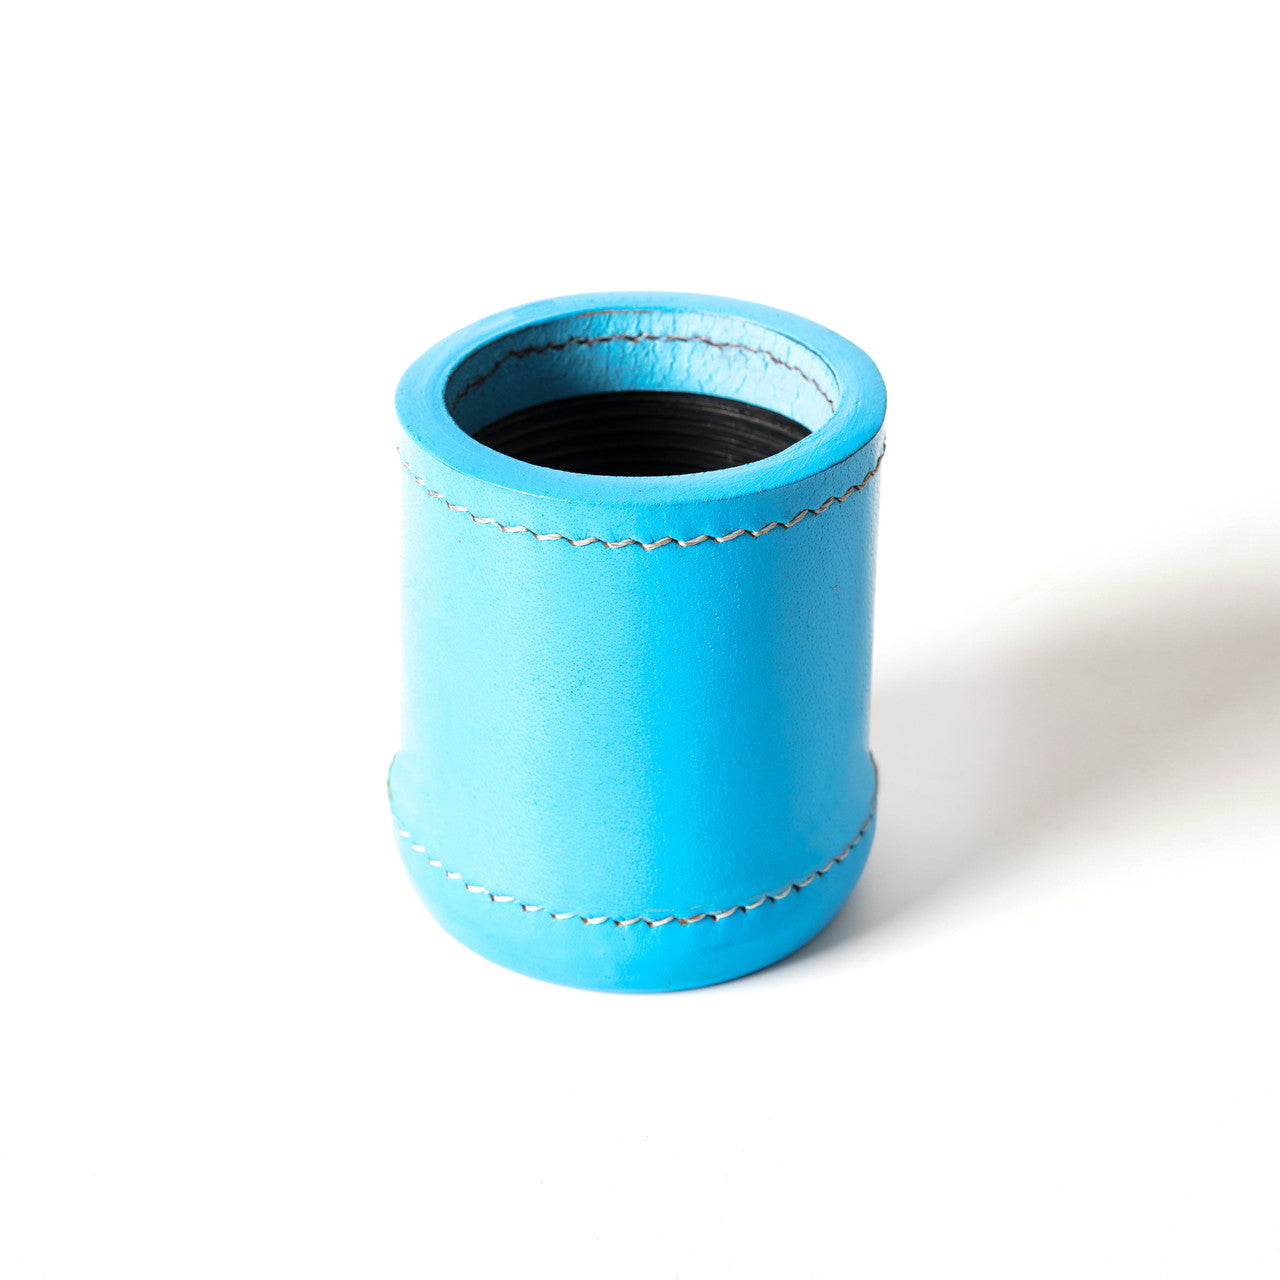 dice cup,leather dice cup,blue dice cup,blue leather dice cup